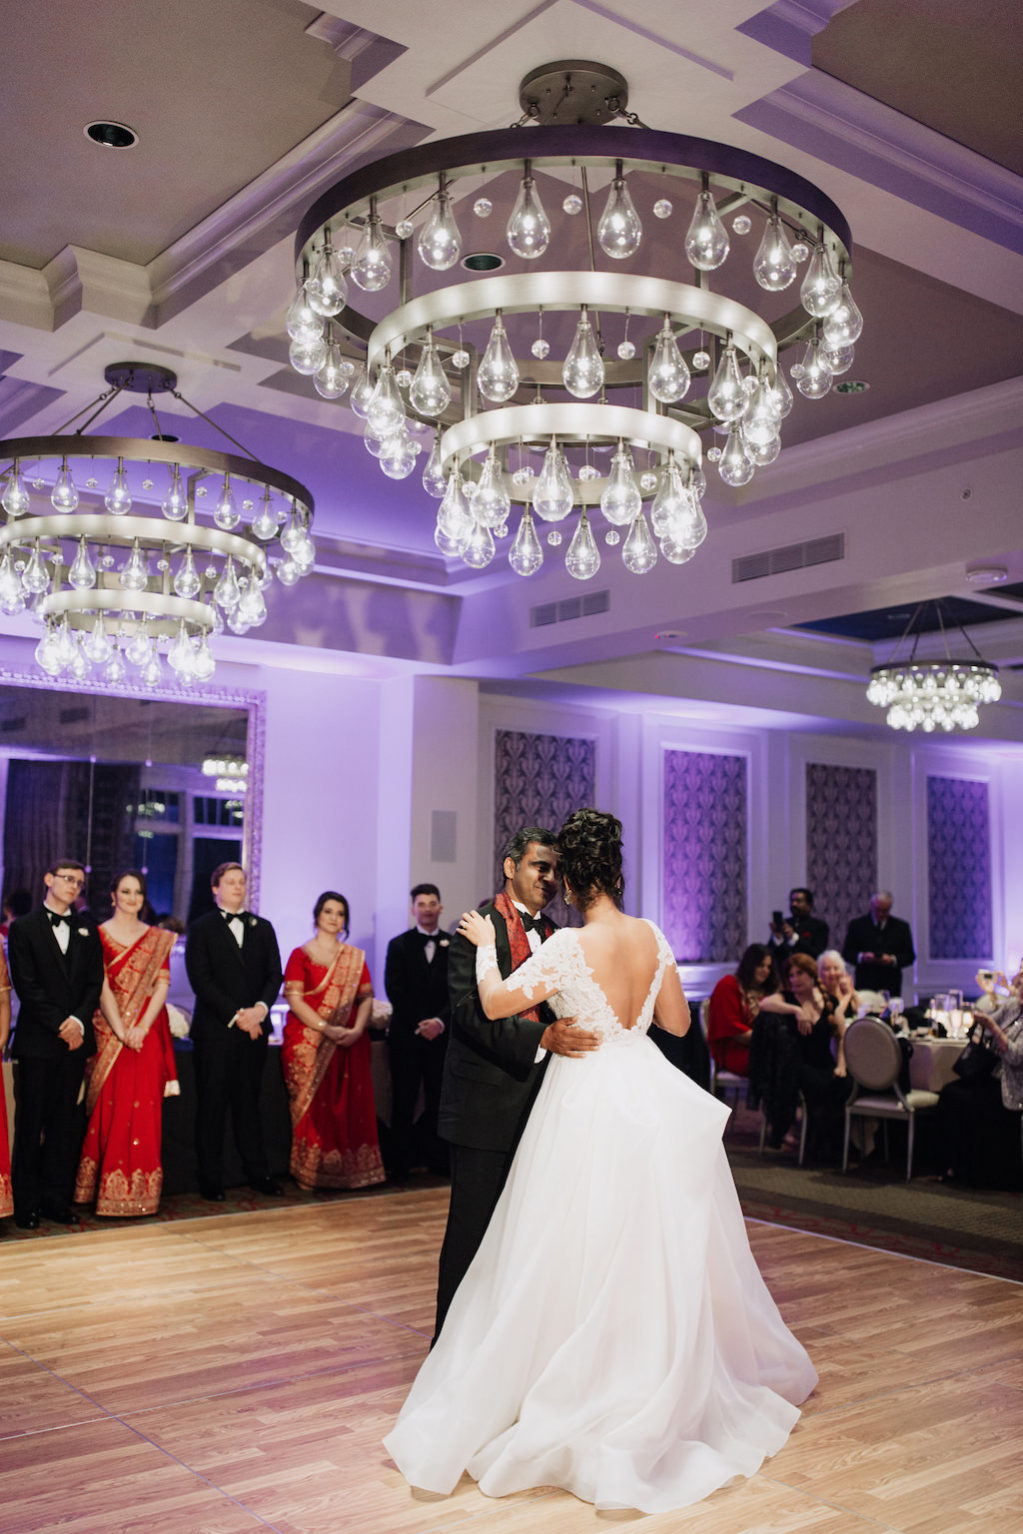 First Dance Wedding Portrait with Bulb Chandelier | Downtown St. Pete Boutique Hotel Venue The Birchwood